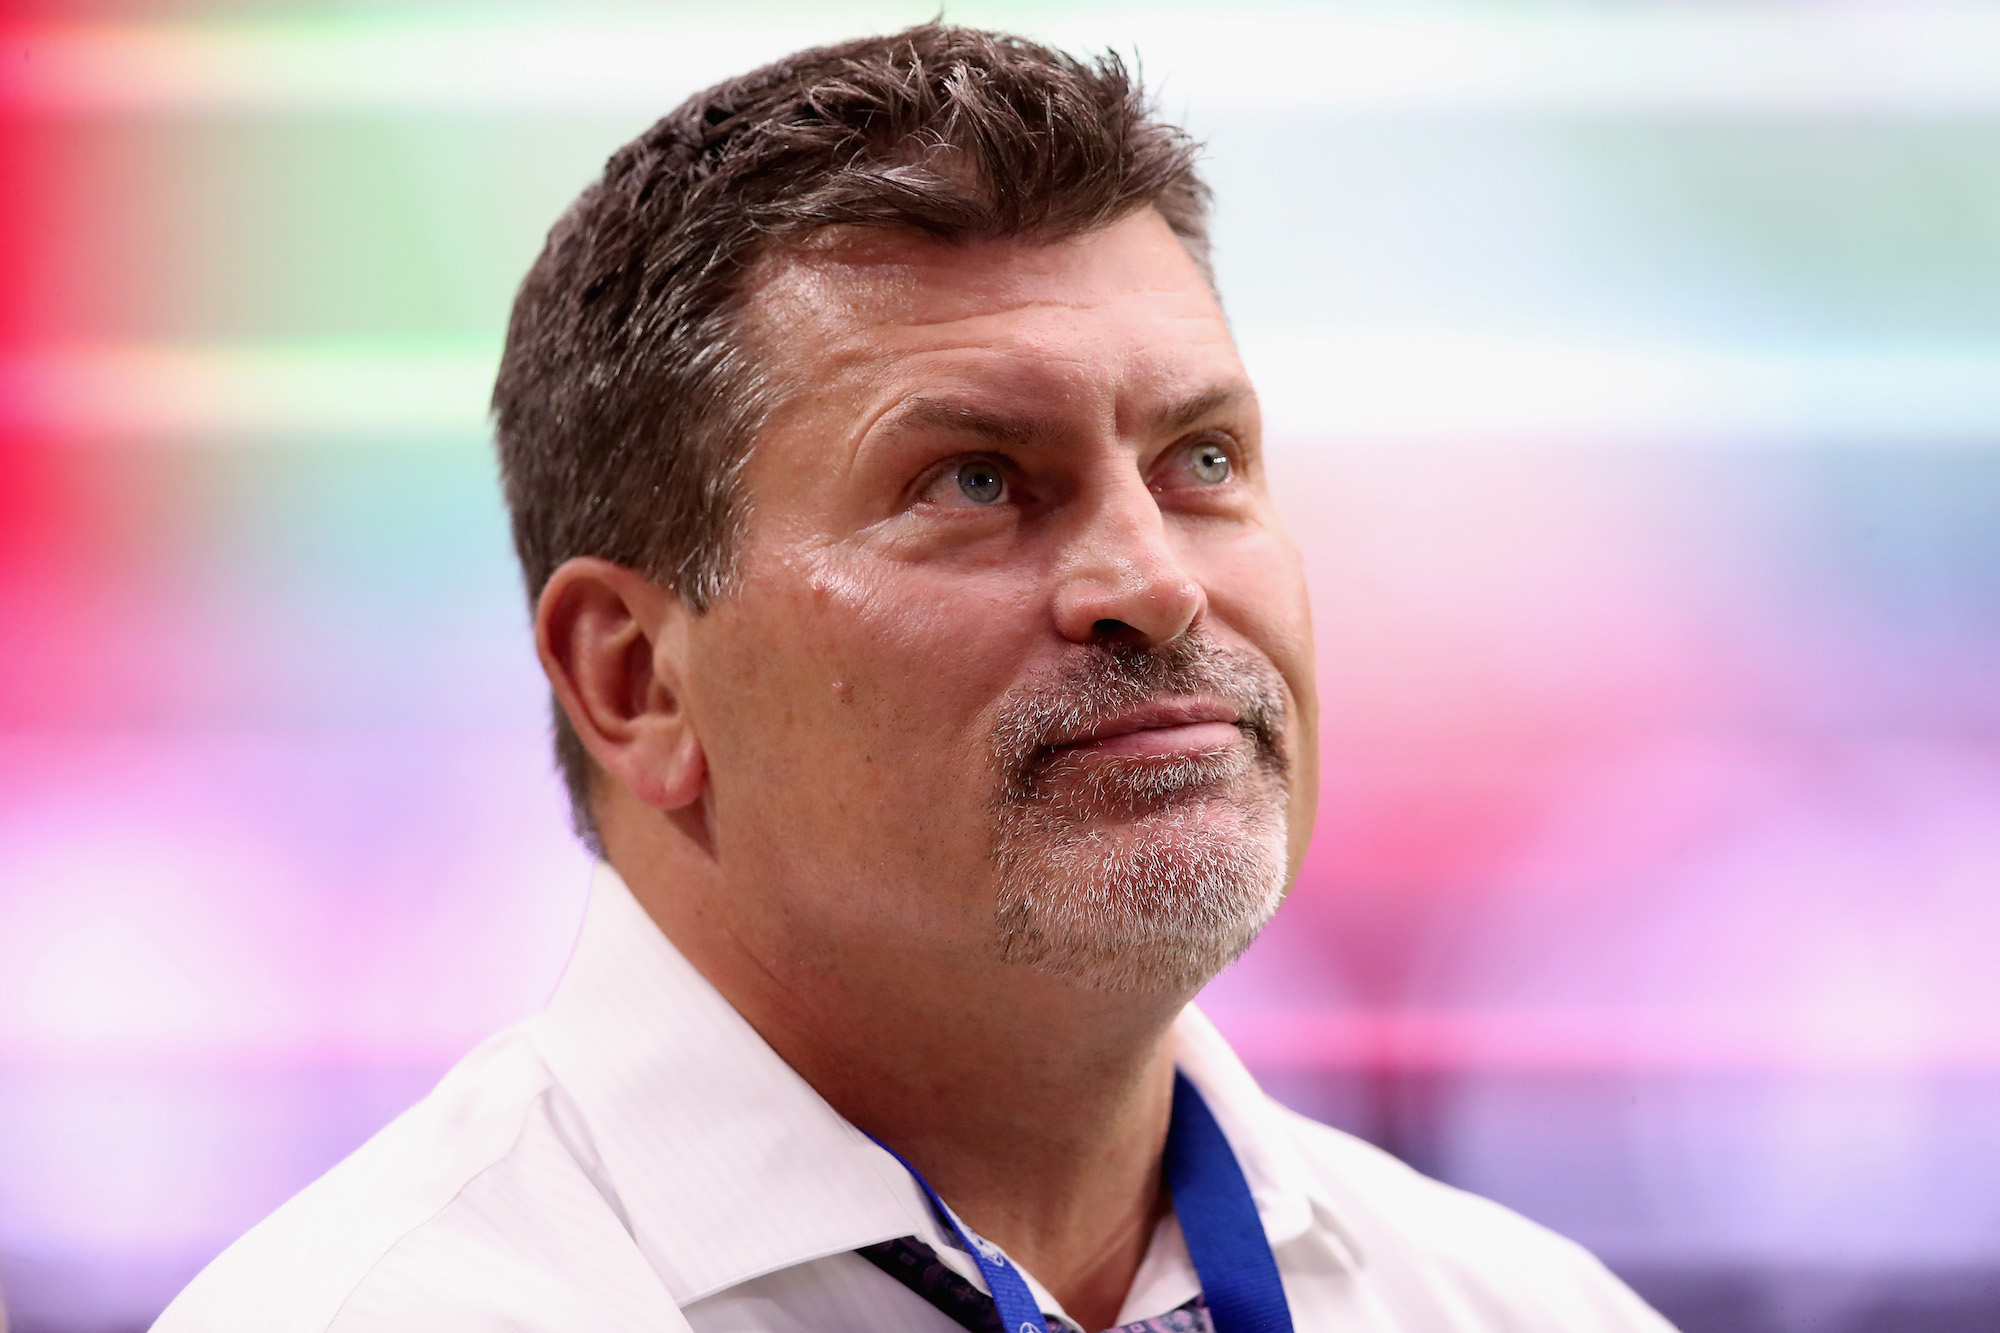 GLENDALE, ARIZONA - SEPTEMBER 08: Former NFL player and current sportscaster Mark Schlereth stands on the field during the NFL game between the Arizona Cardinals and the Detroit Lions at State Farm Stadium on September 08, 2019 in Glendale, Arizona. (Photo by Christian Petersen/Getty Images)